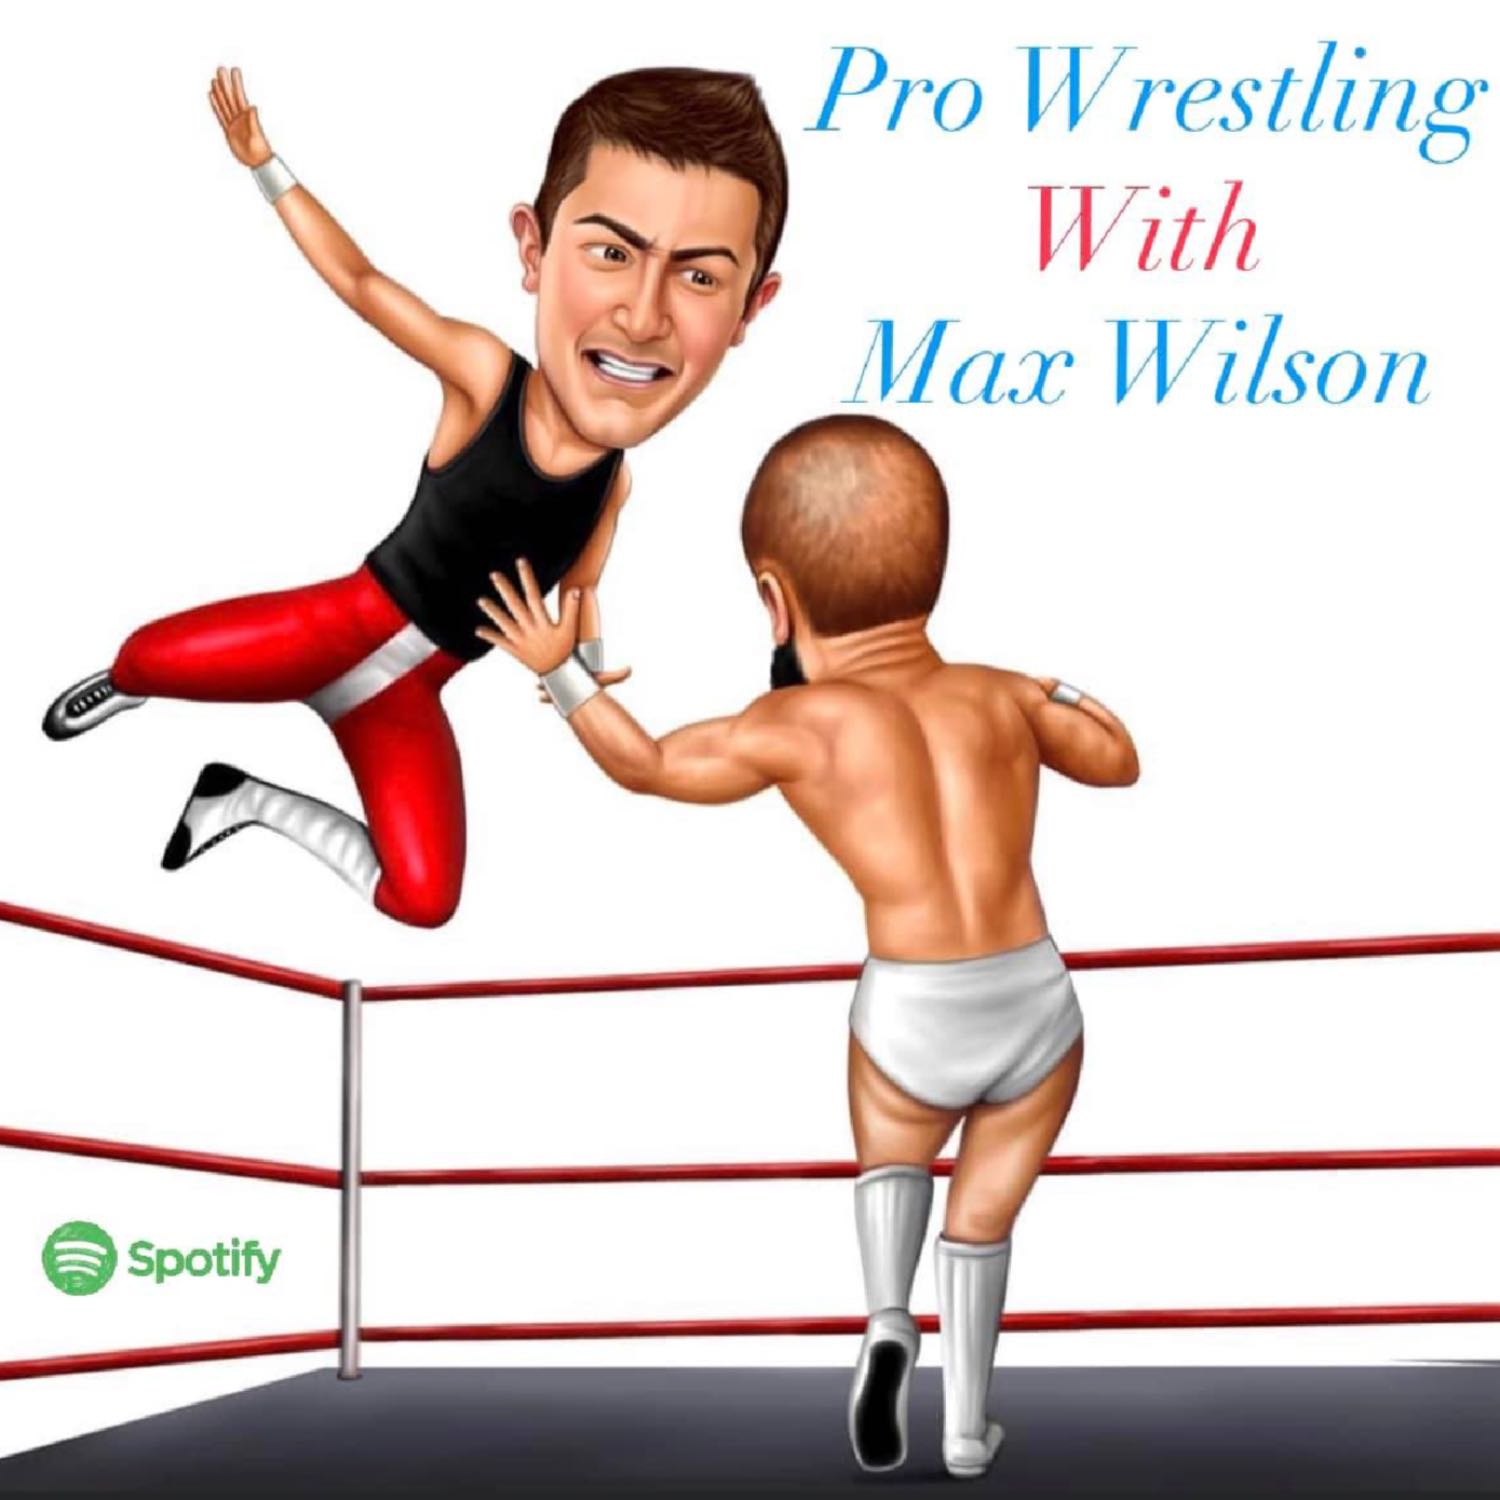 Pro Wrestling with Max Wilson